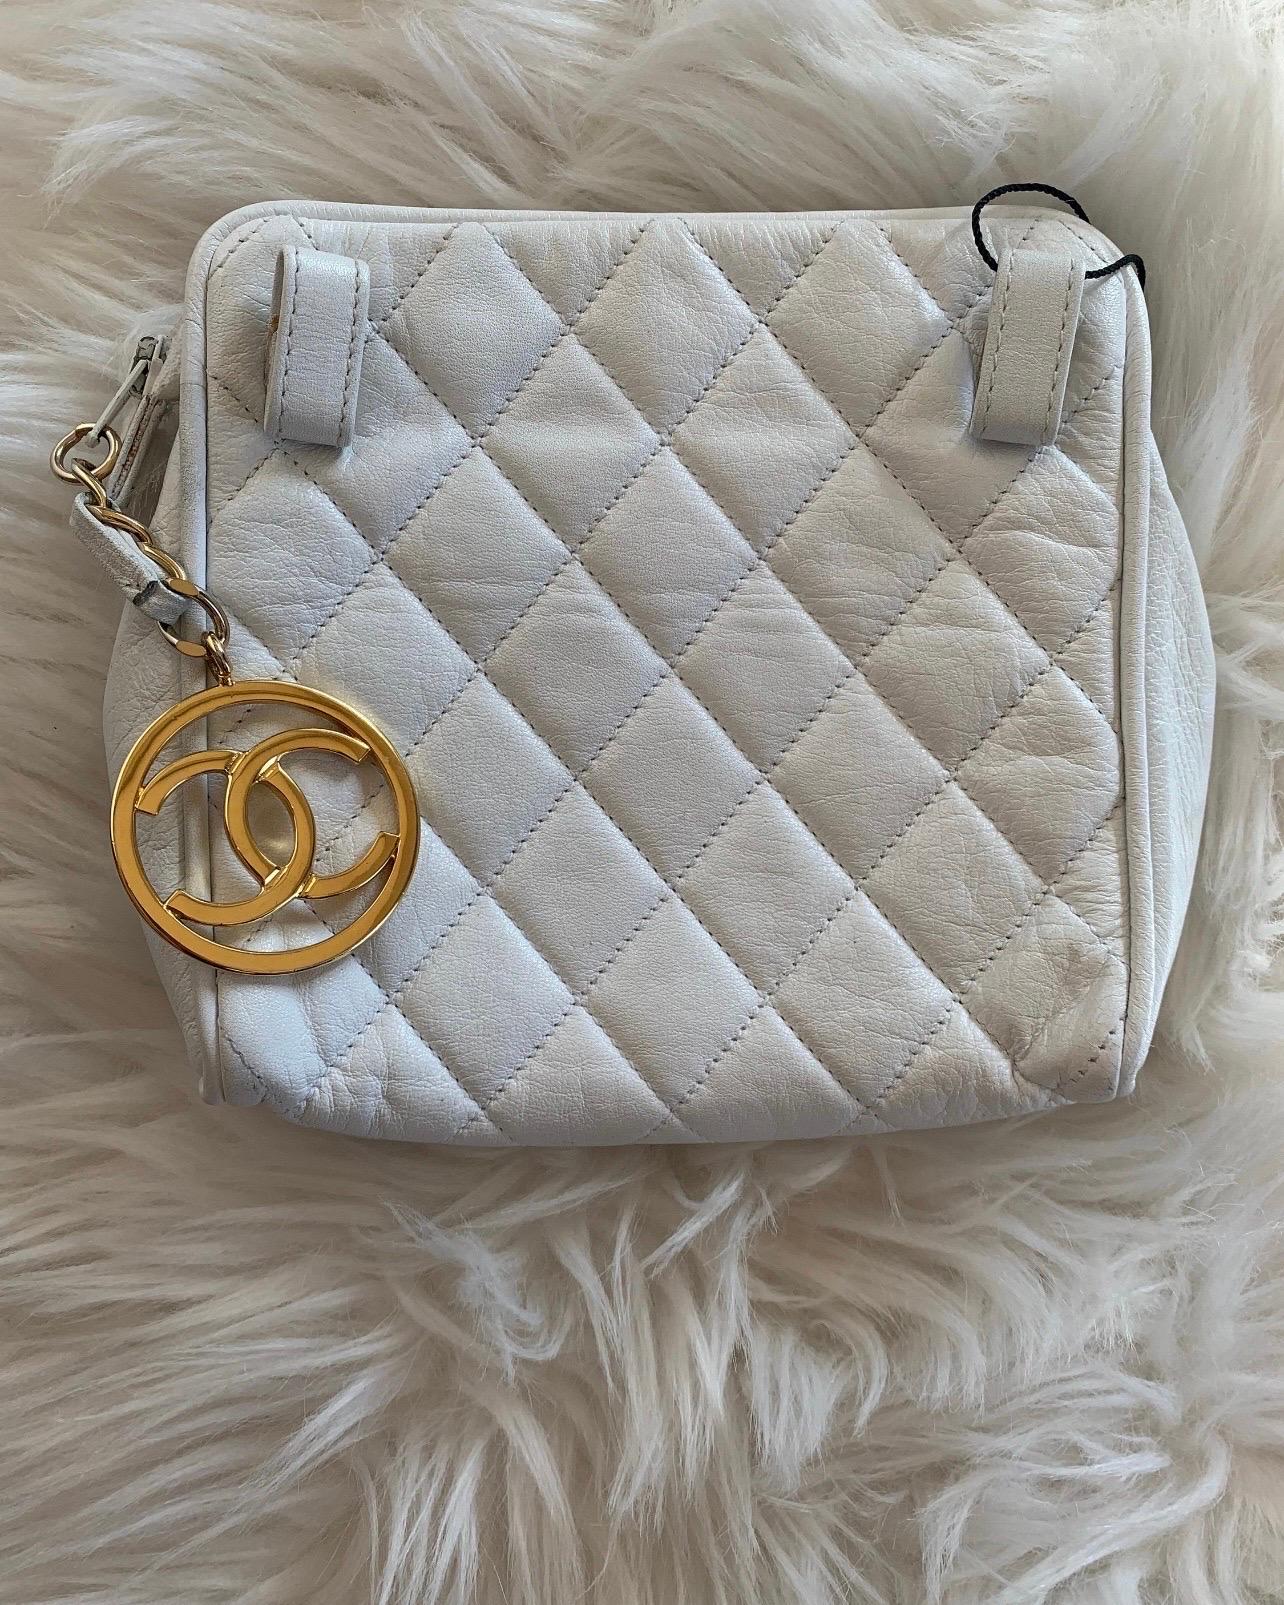 RARE Authentic Vintage CHANEL 1990’s Belt Bag!

ICONIC style, and timeless luxury. EXCELLENT condition

This is NOT a tiny belt bag. This can fit all the essentials, and then some! Check measurements. 

It can be worn as belt bag, a sling bag over